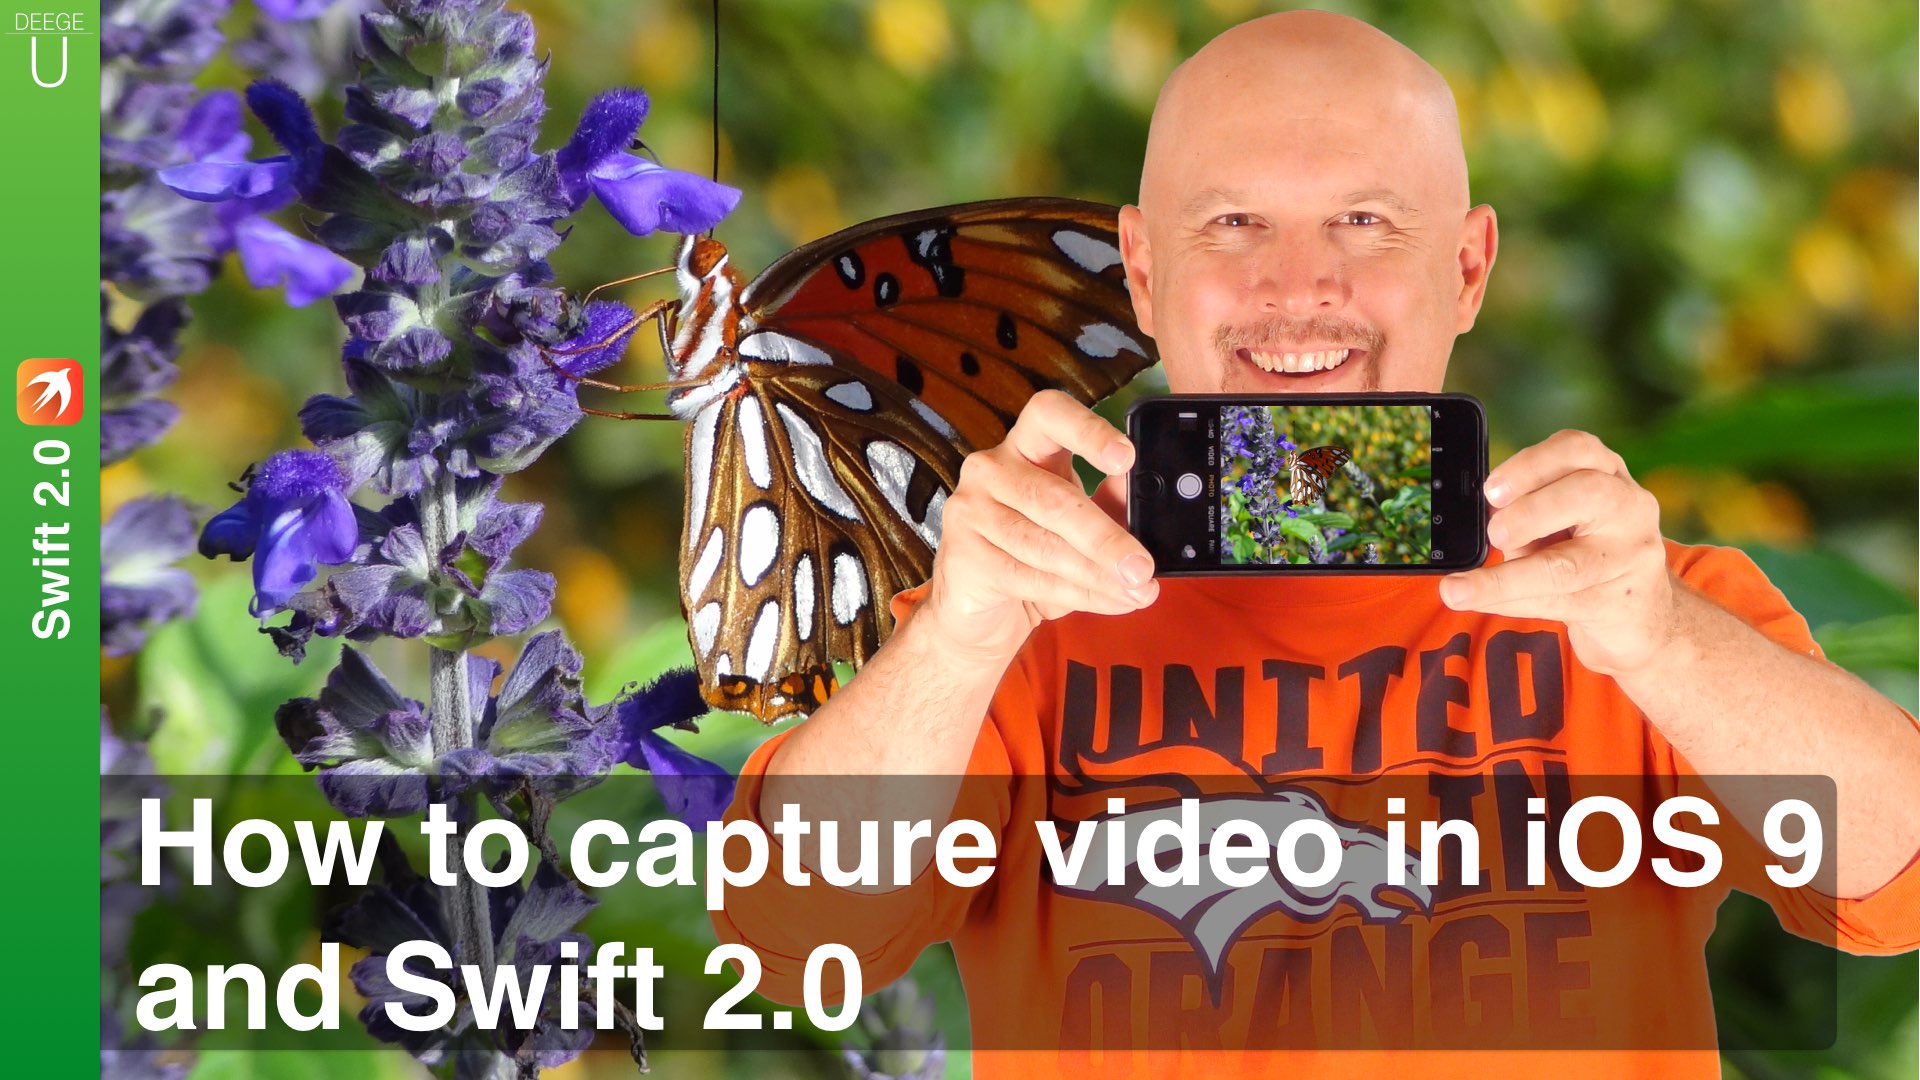 How to capture video in iOS 9 and Swift 2.0